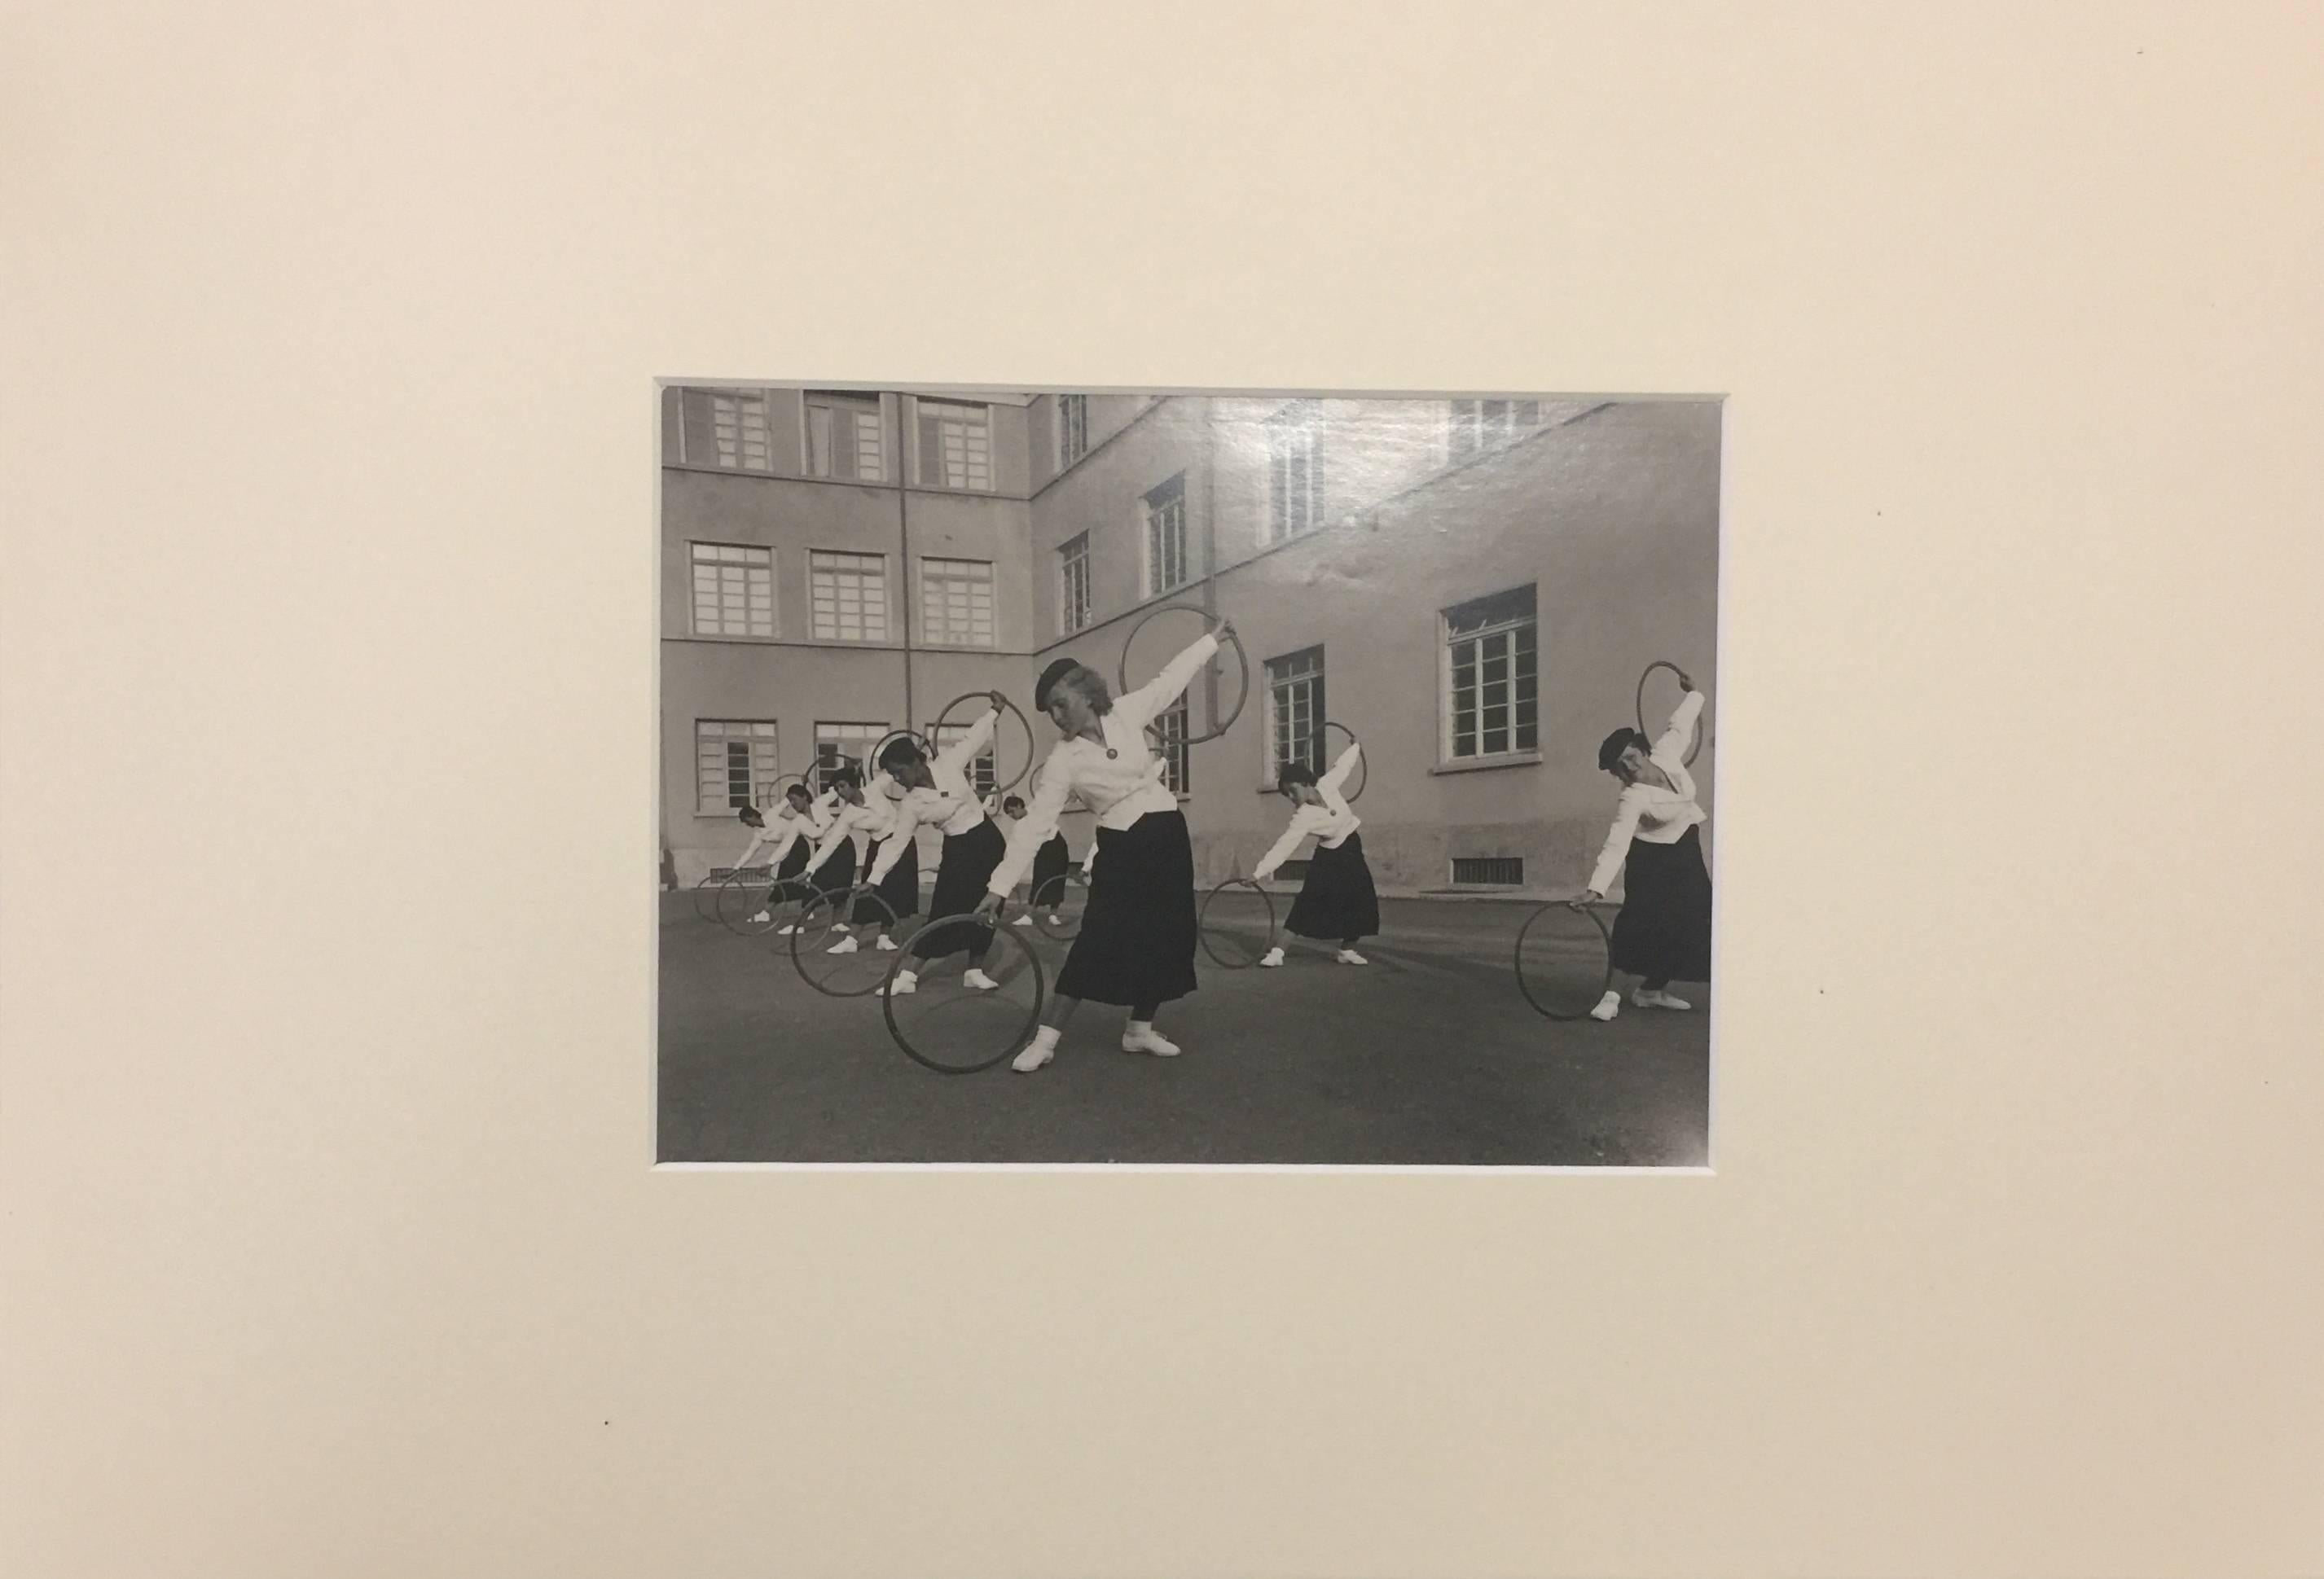 Fascism - Female Exercises with wooden hoops - Photograph by Unknown